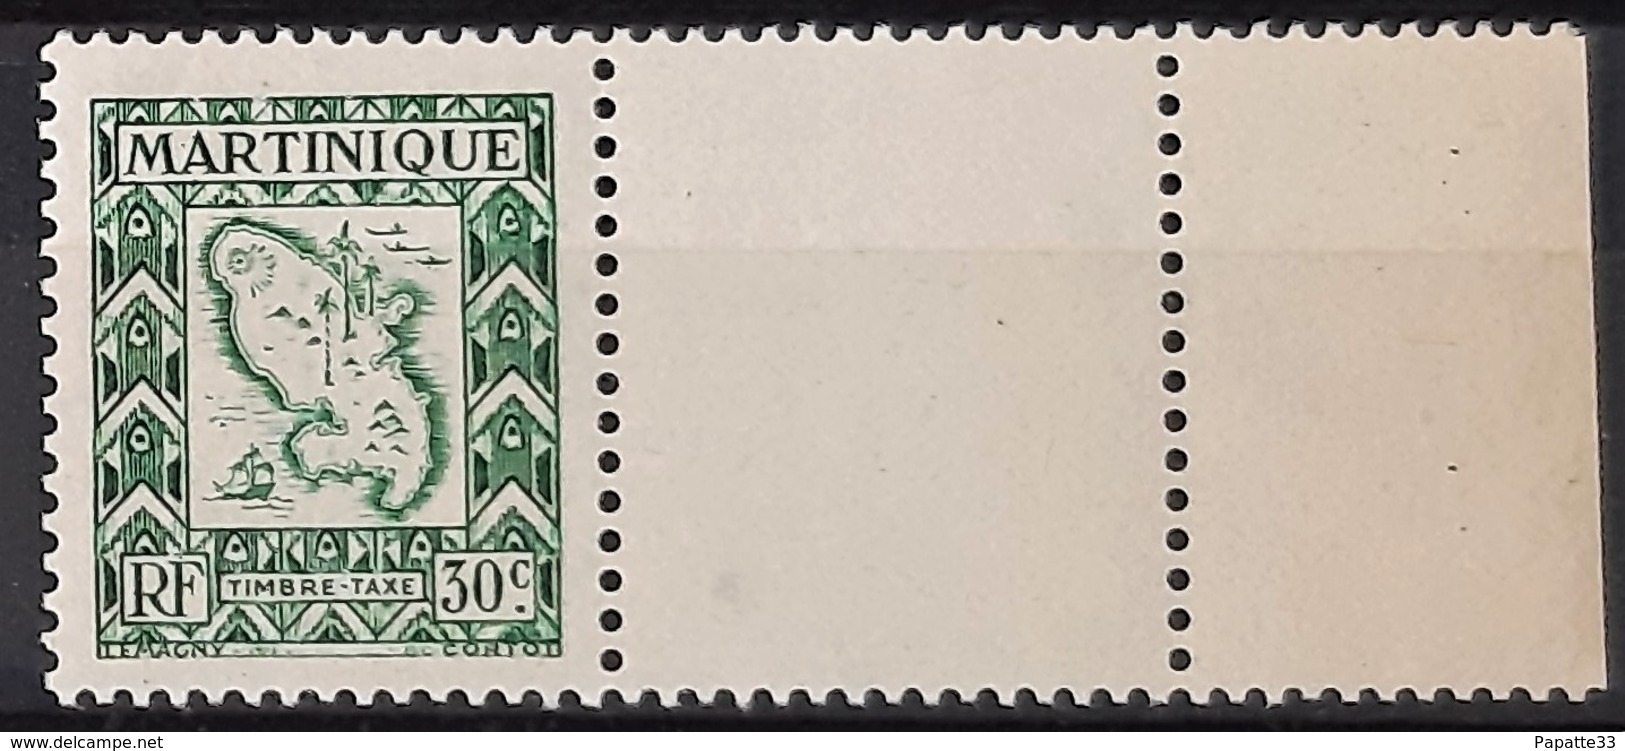 MARTINIQUE TAXE N°28 - 30c Vert - Neuf Sans Charnière / MNH - Timbres-taxe